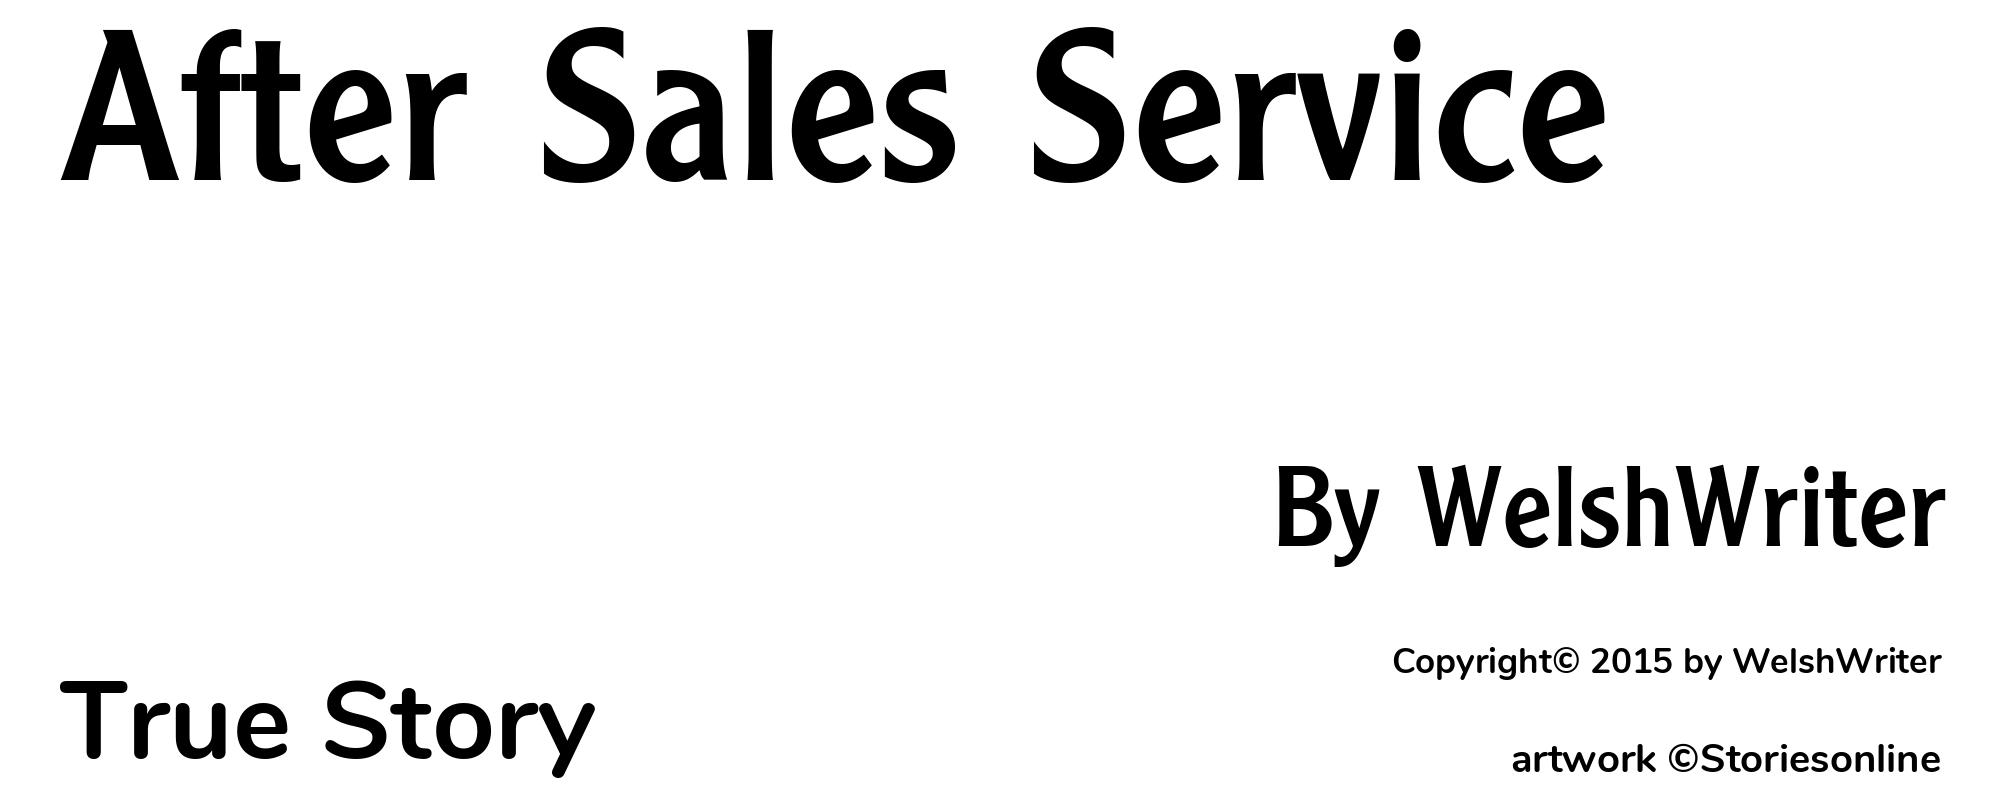 After Sales Service - Cover